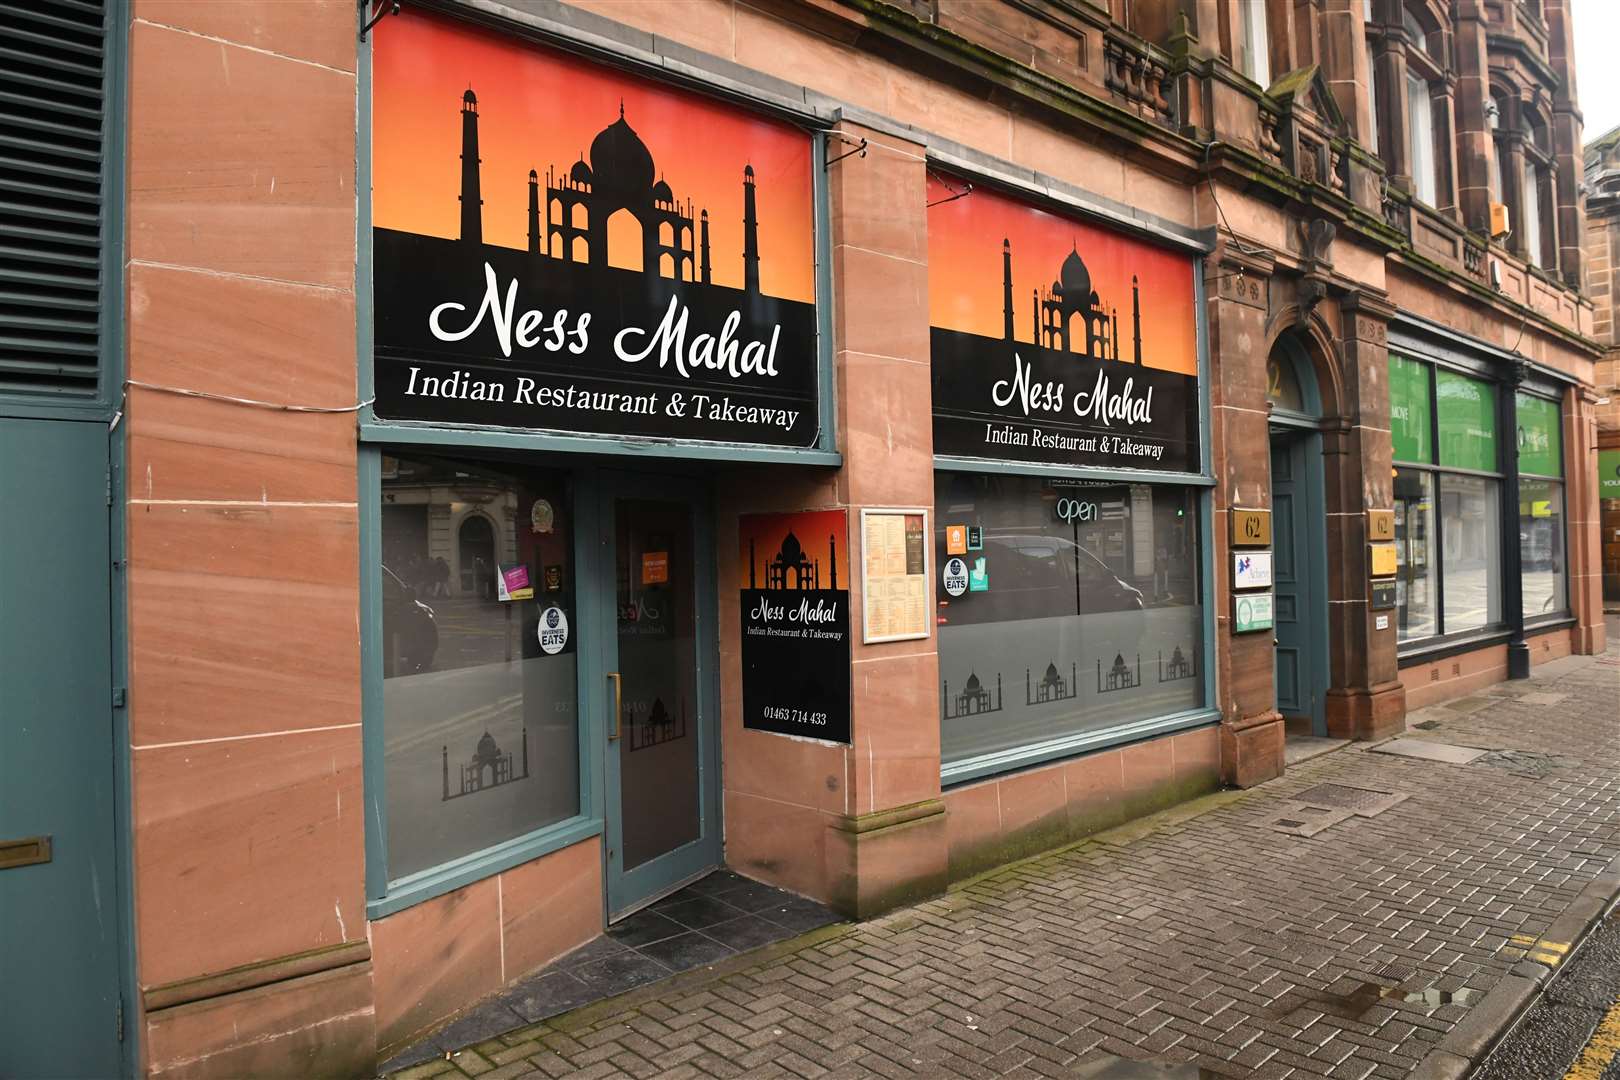 Ness Mahal Indian Restaurant and Takeaway is closing permanently.